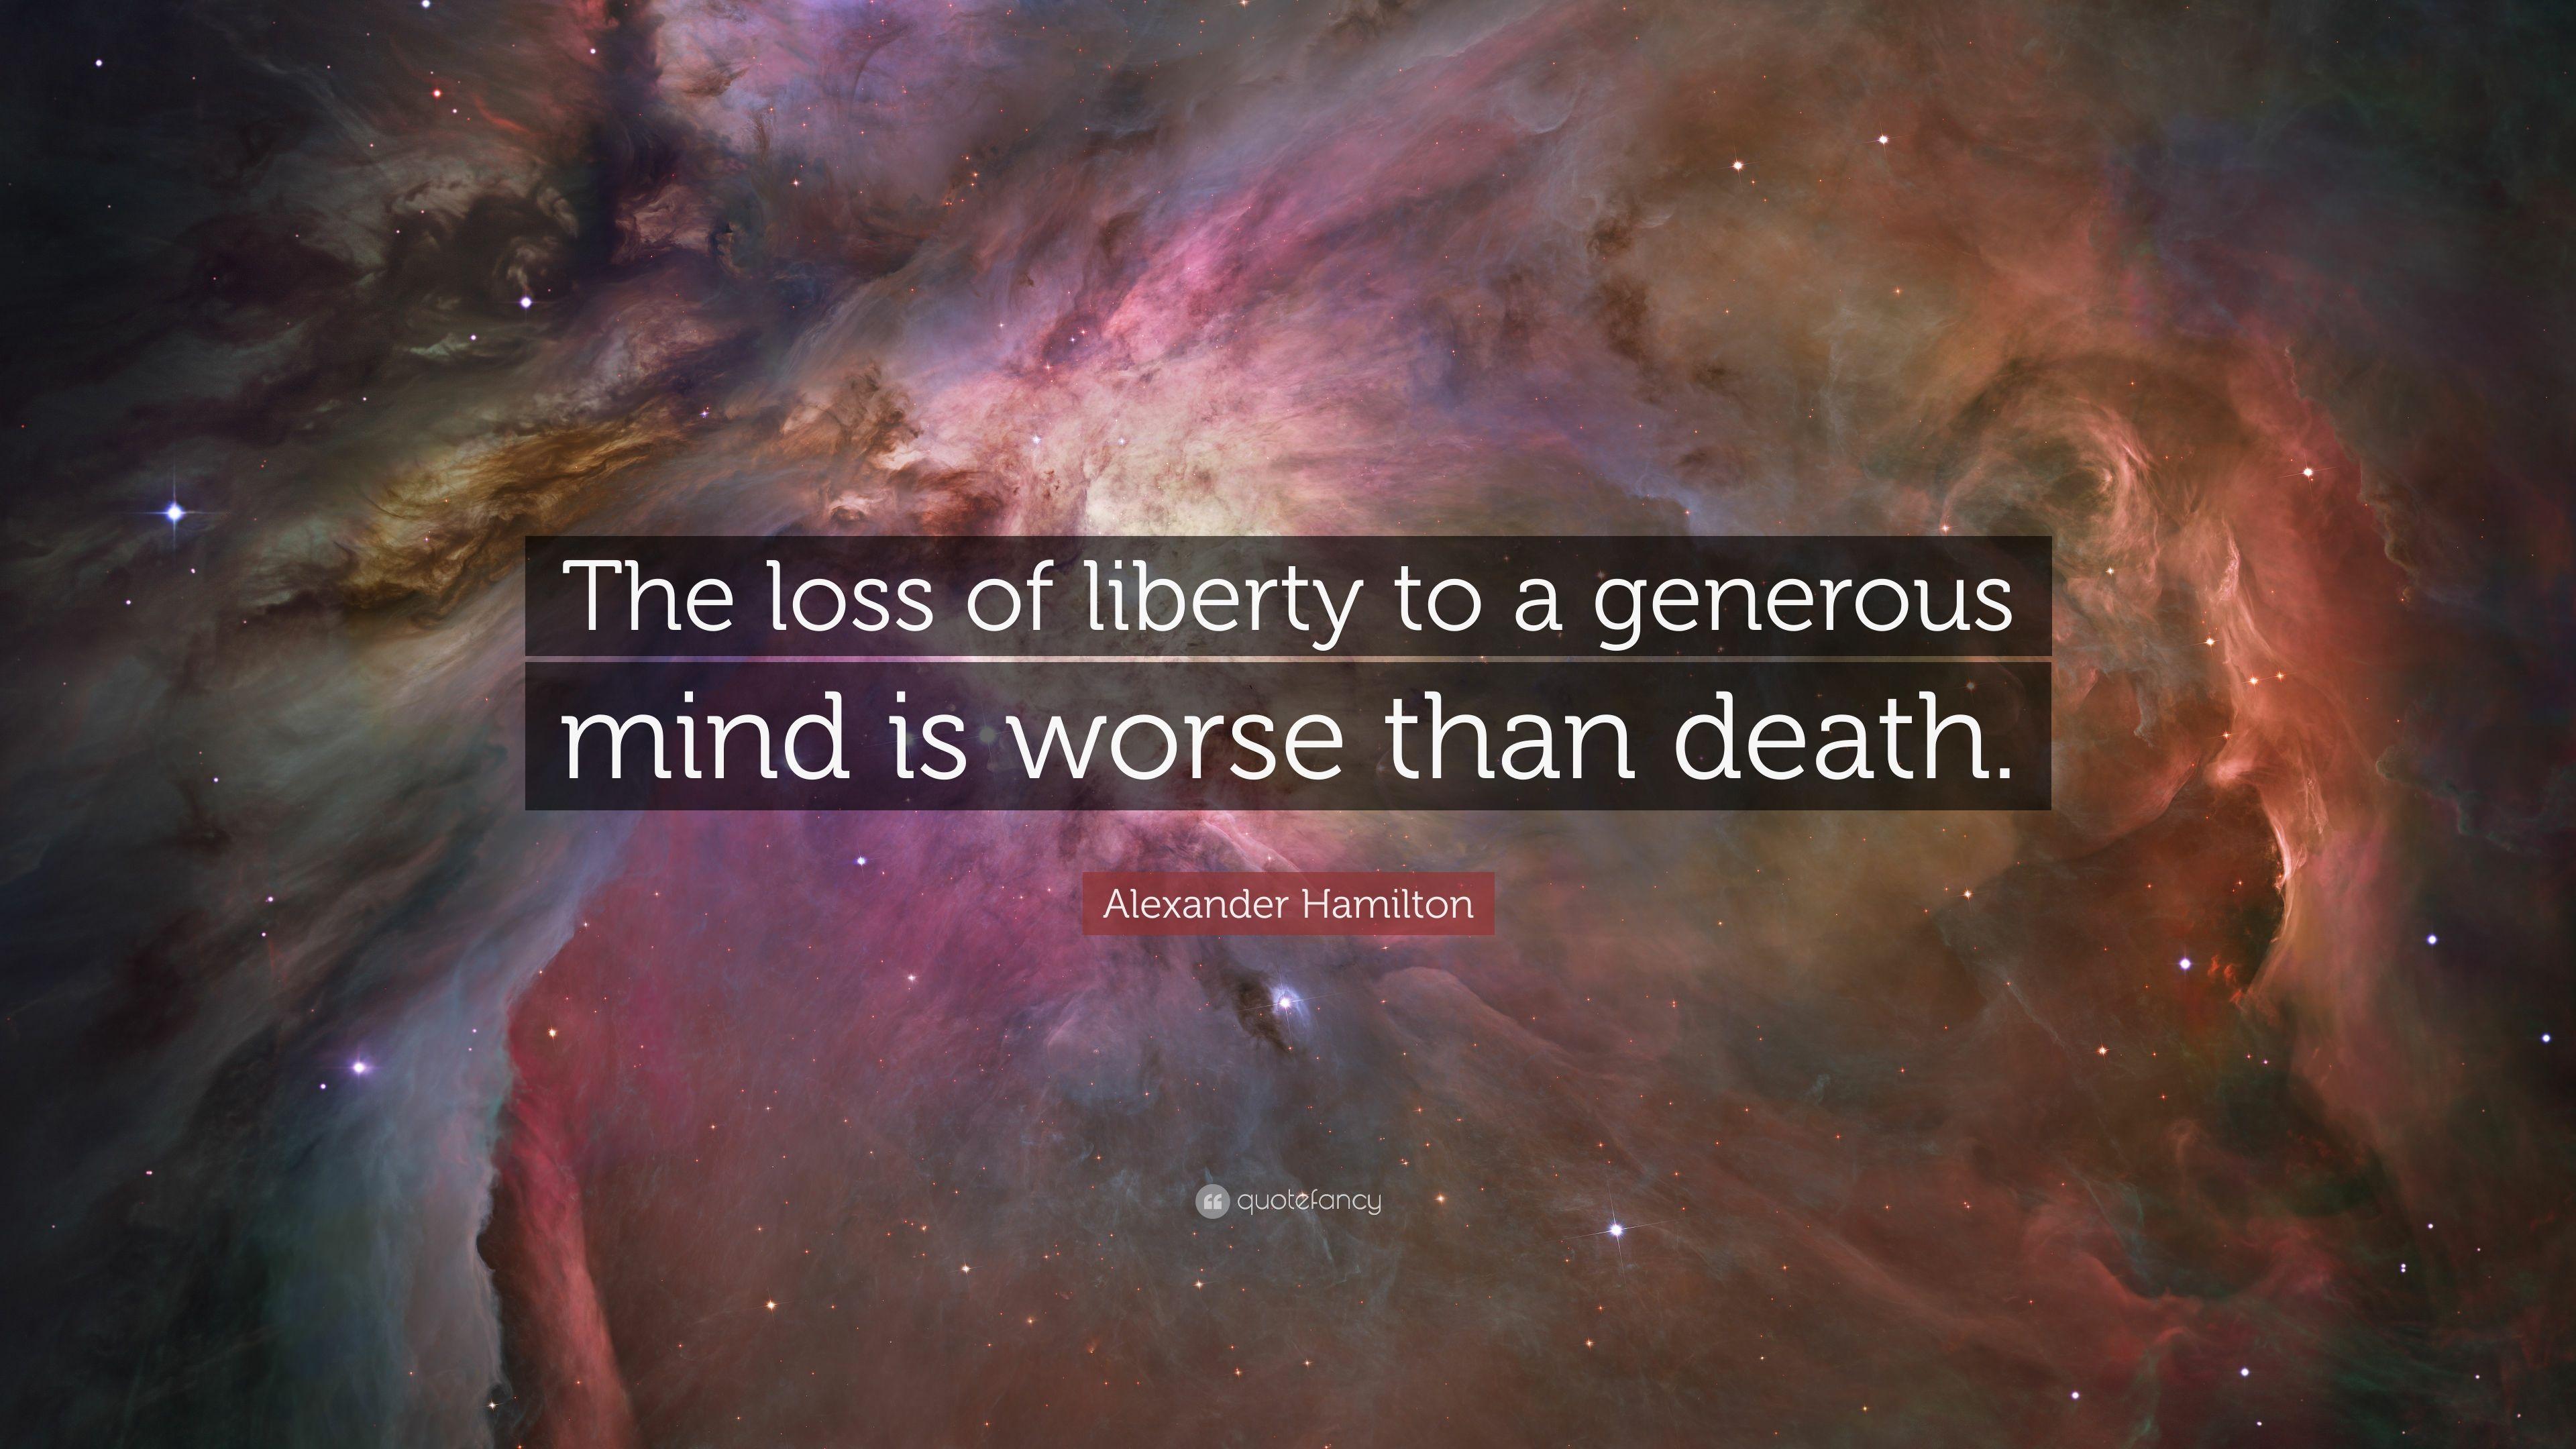 Alexander Hamilton Quote: “The loss of liberty to a generous mind